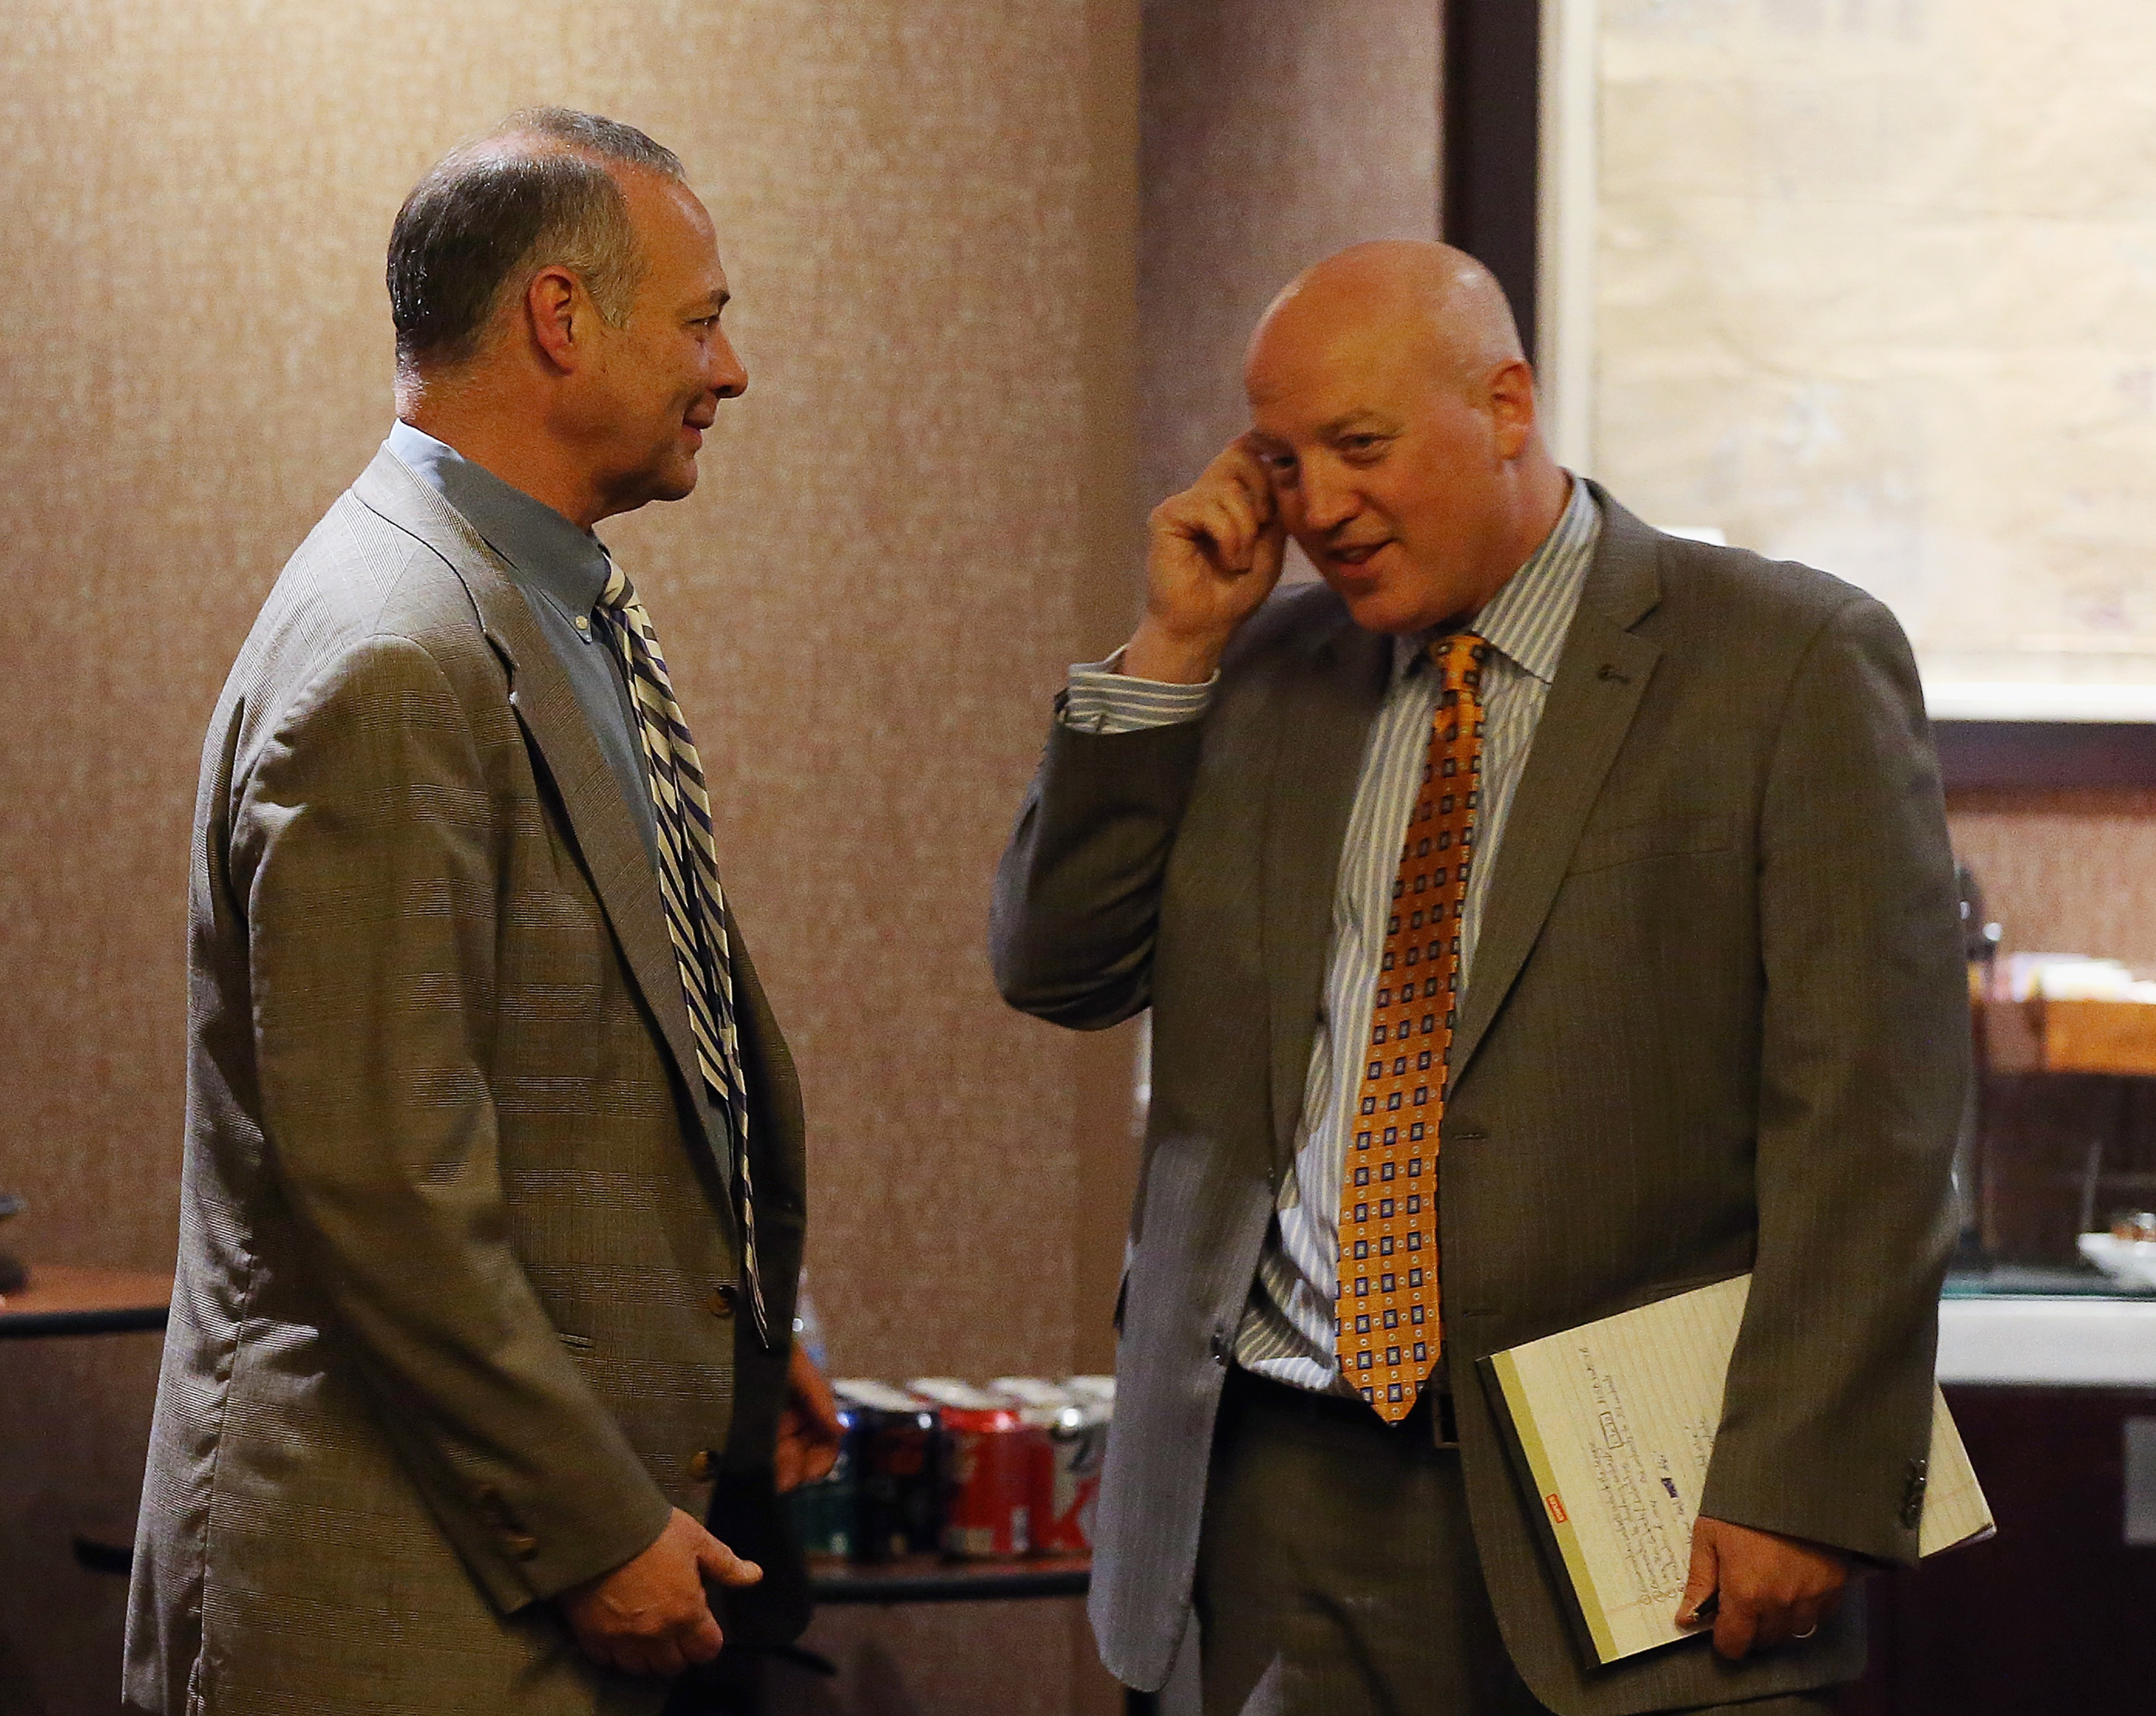 DEC 05: Steve Fehr of the NHLPA and Bill Daly of the NHL discuss CBA negotiations at the Westin Times Square in New York